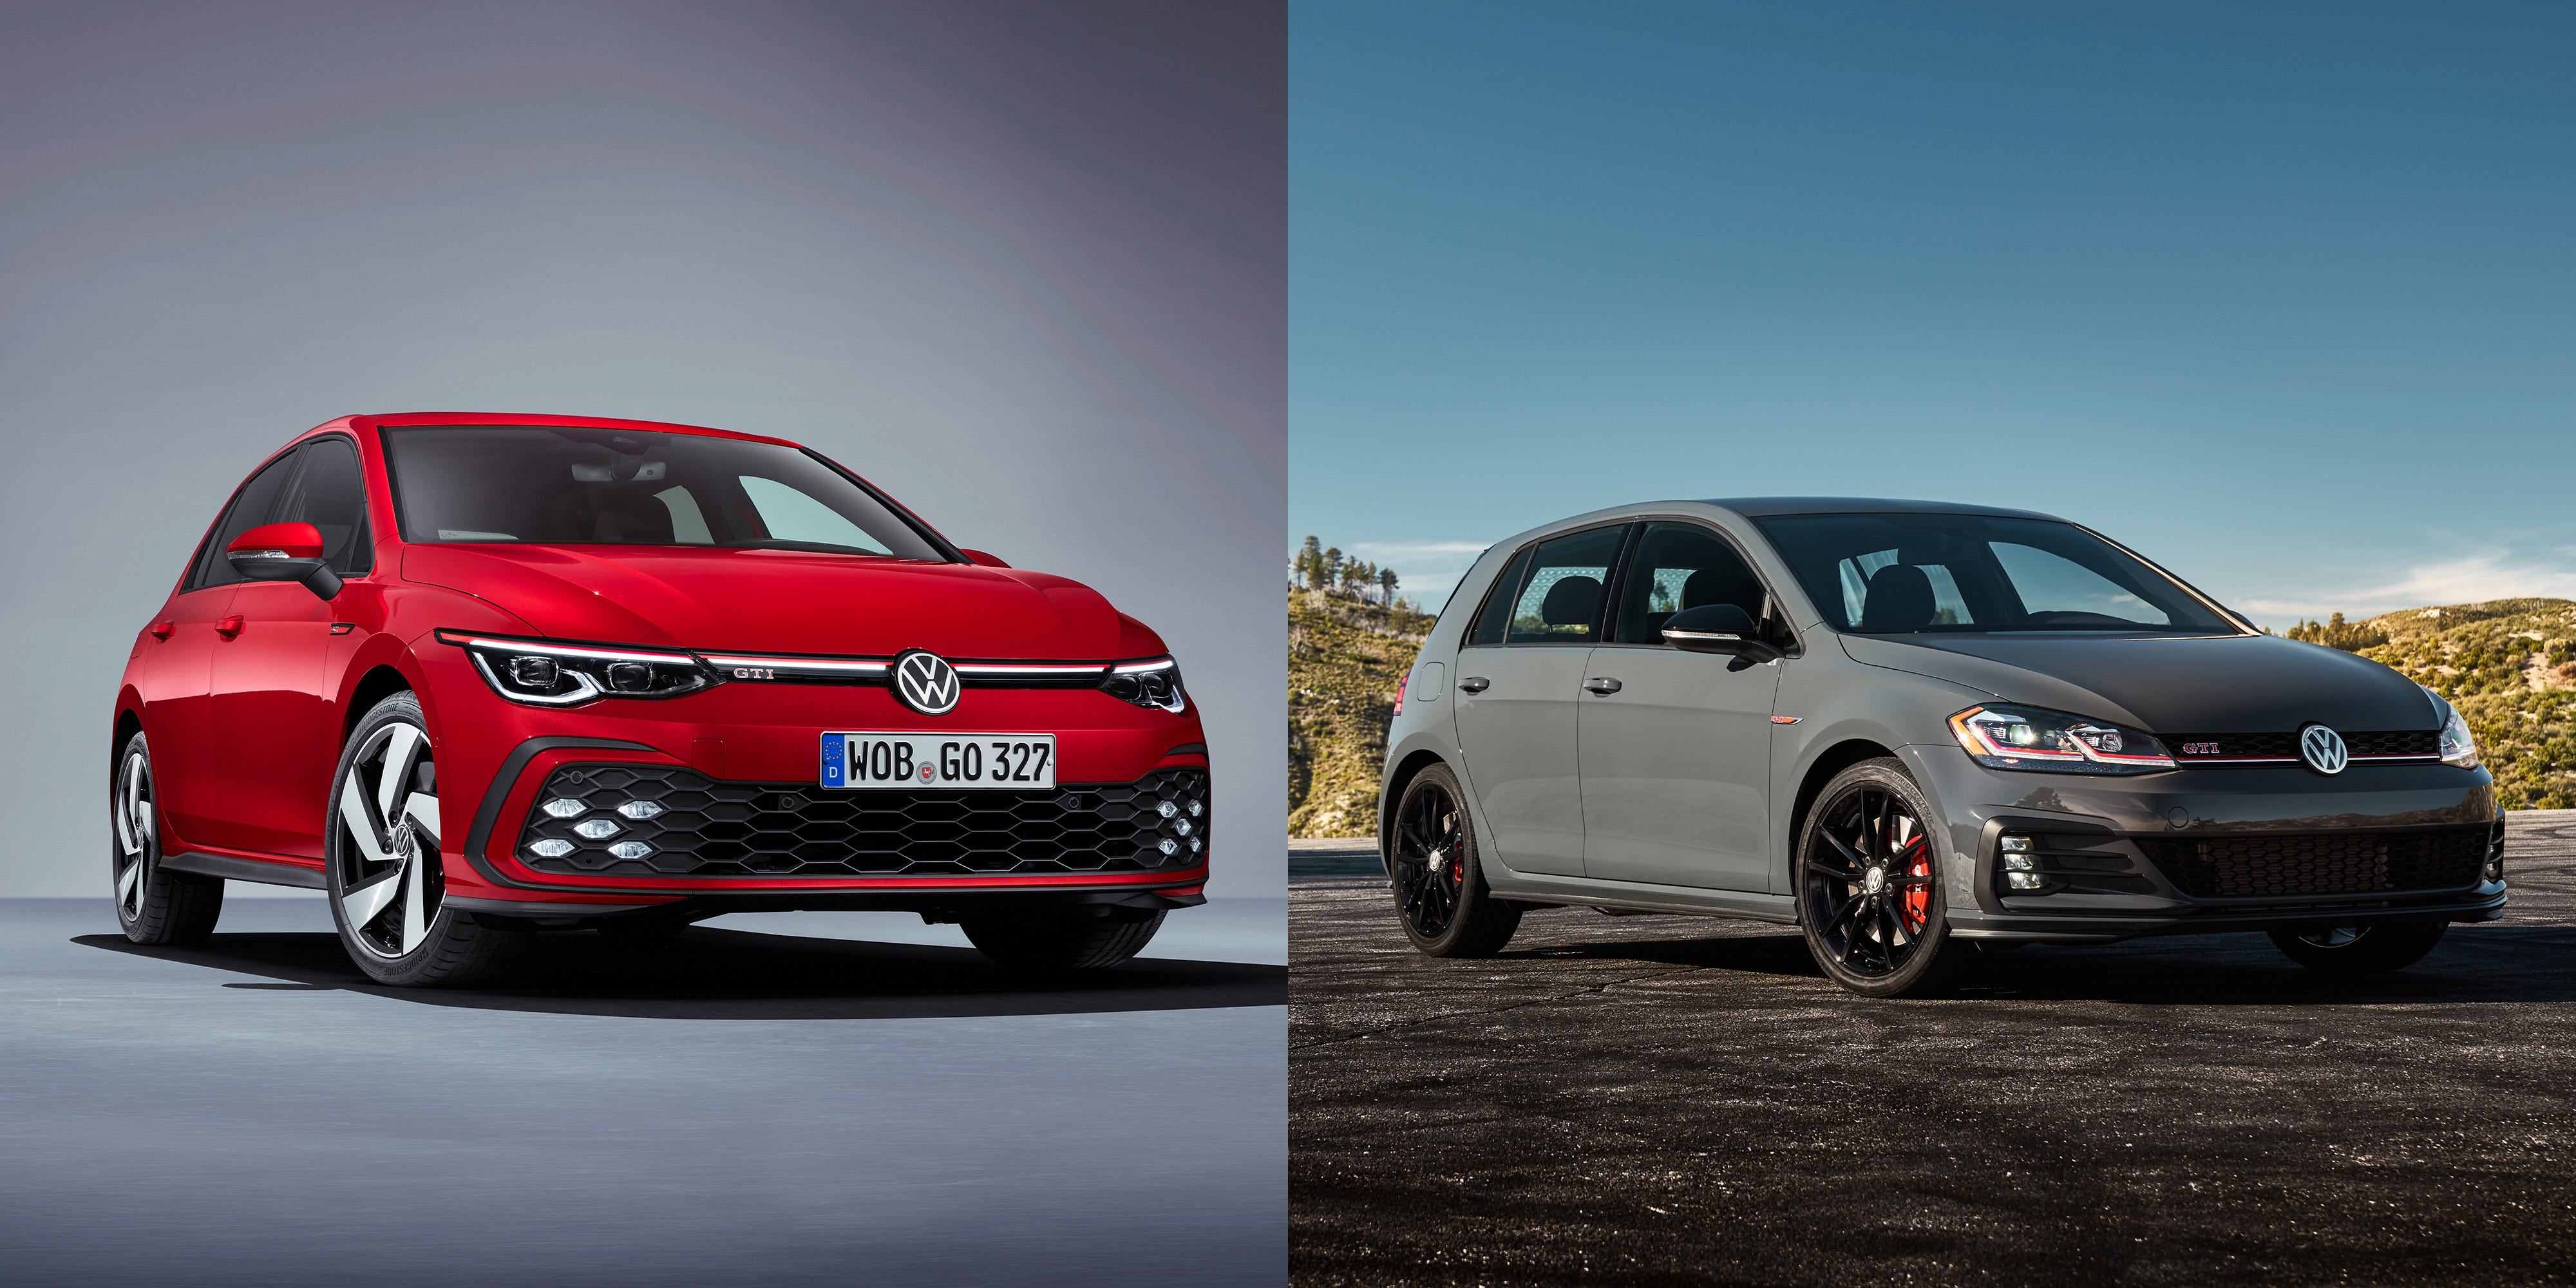 New Mk 8 VW Golf GTI Will Be 2022 Model in U.S., Mk 7 Carries Over for 2021